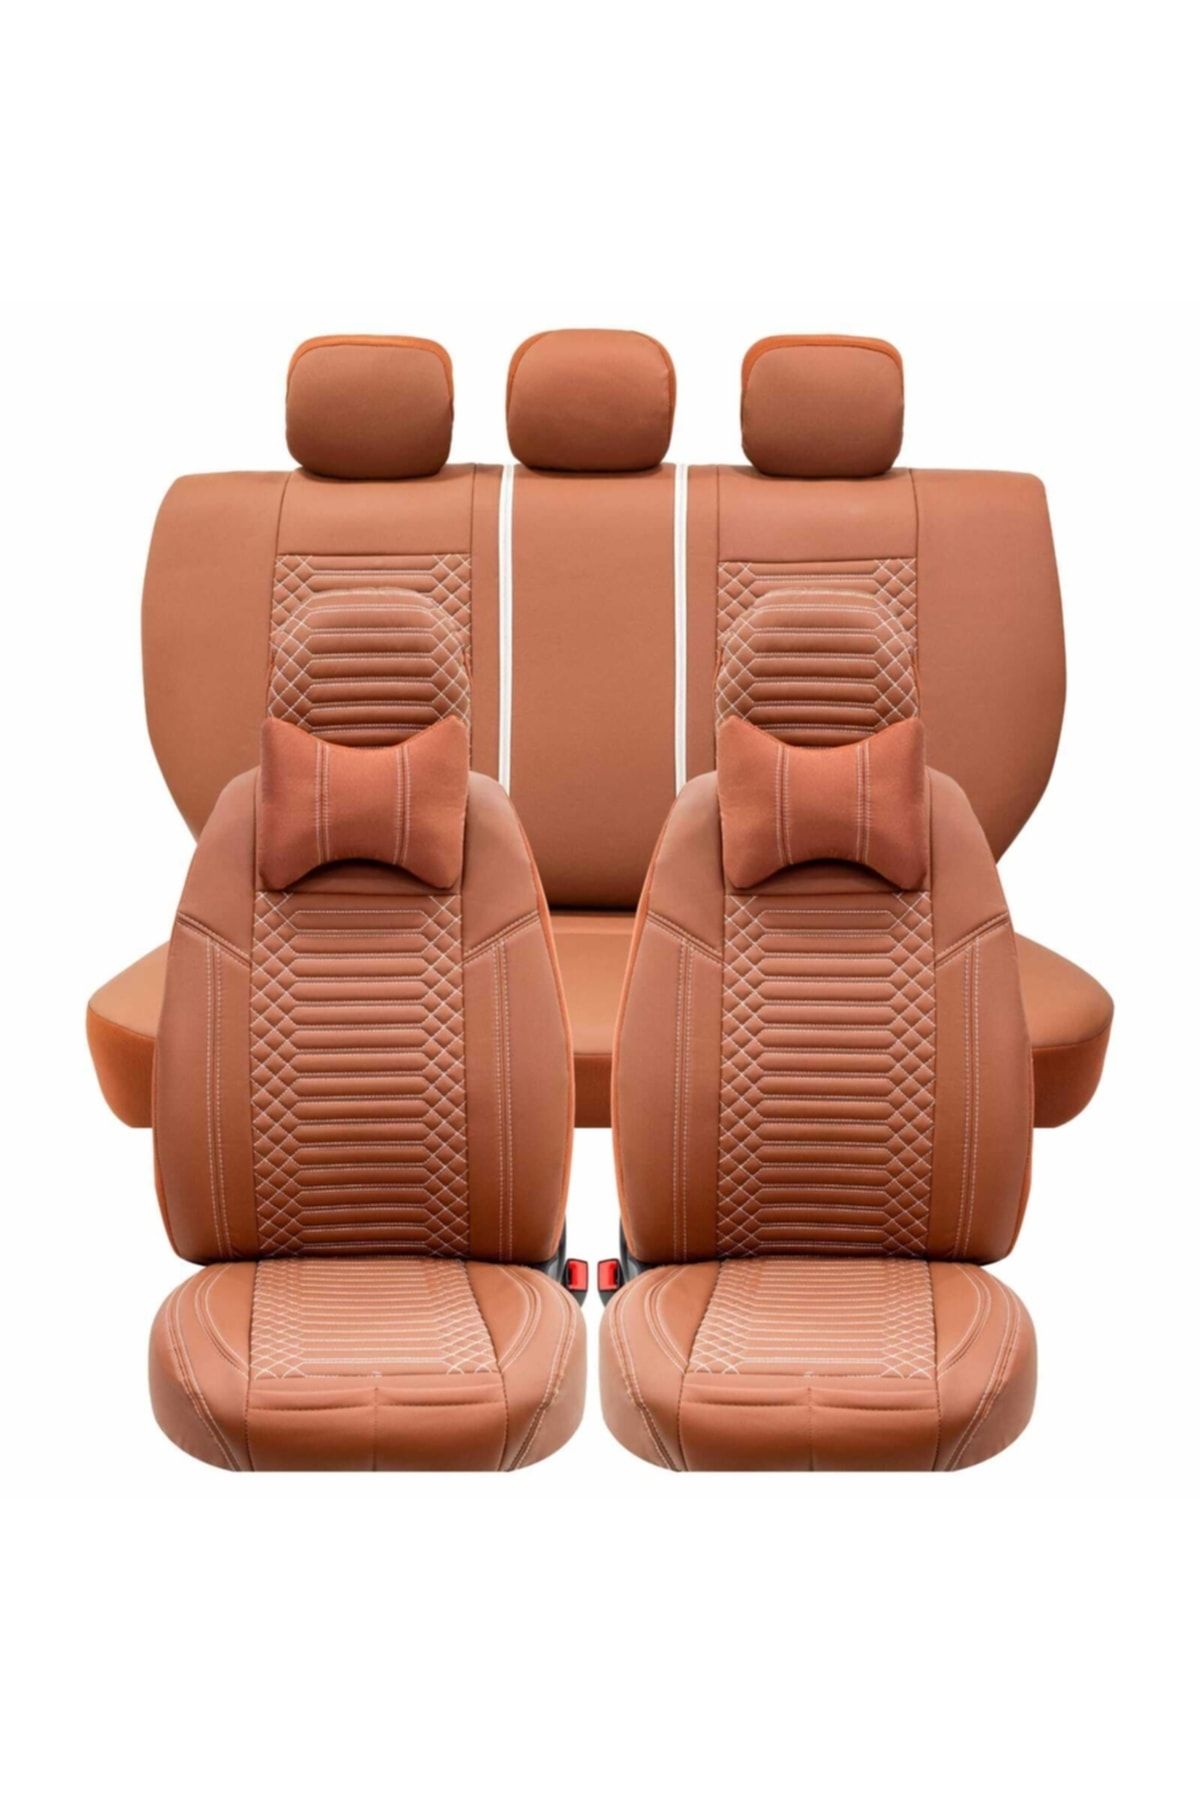 stiloto Universal Leather Car Seat Cover Set of 5 Compatible with